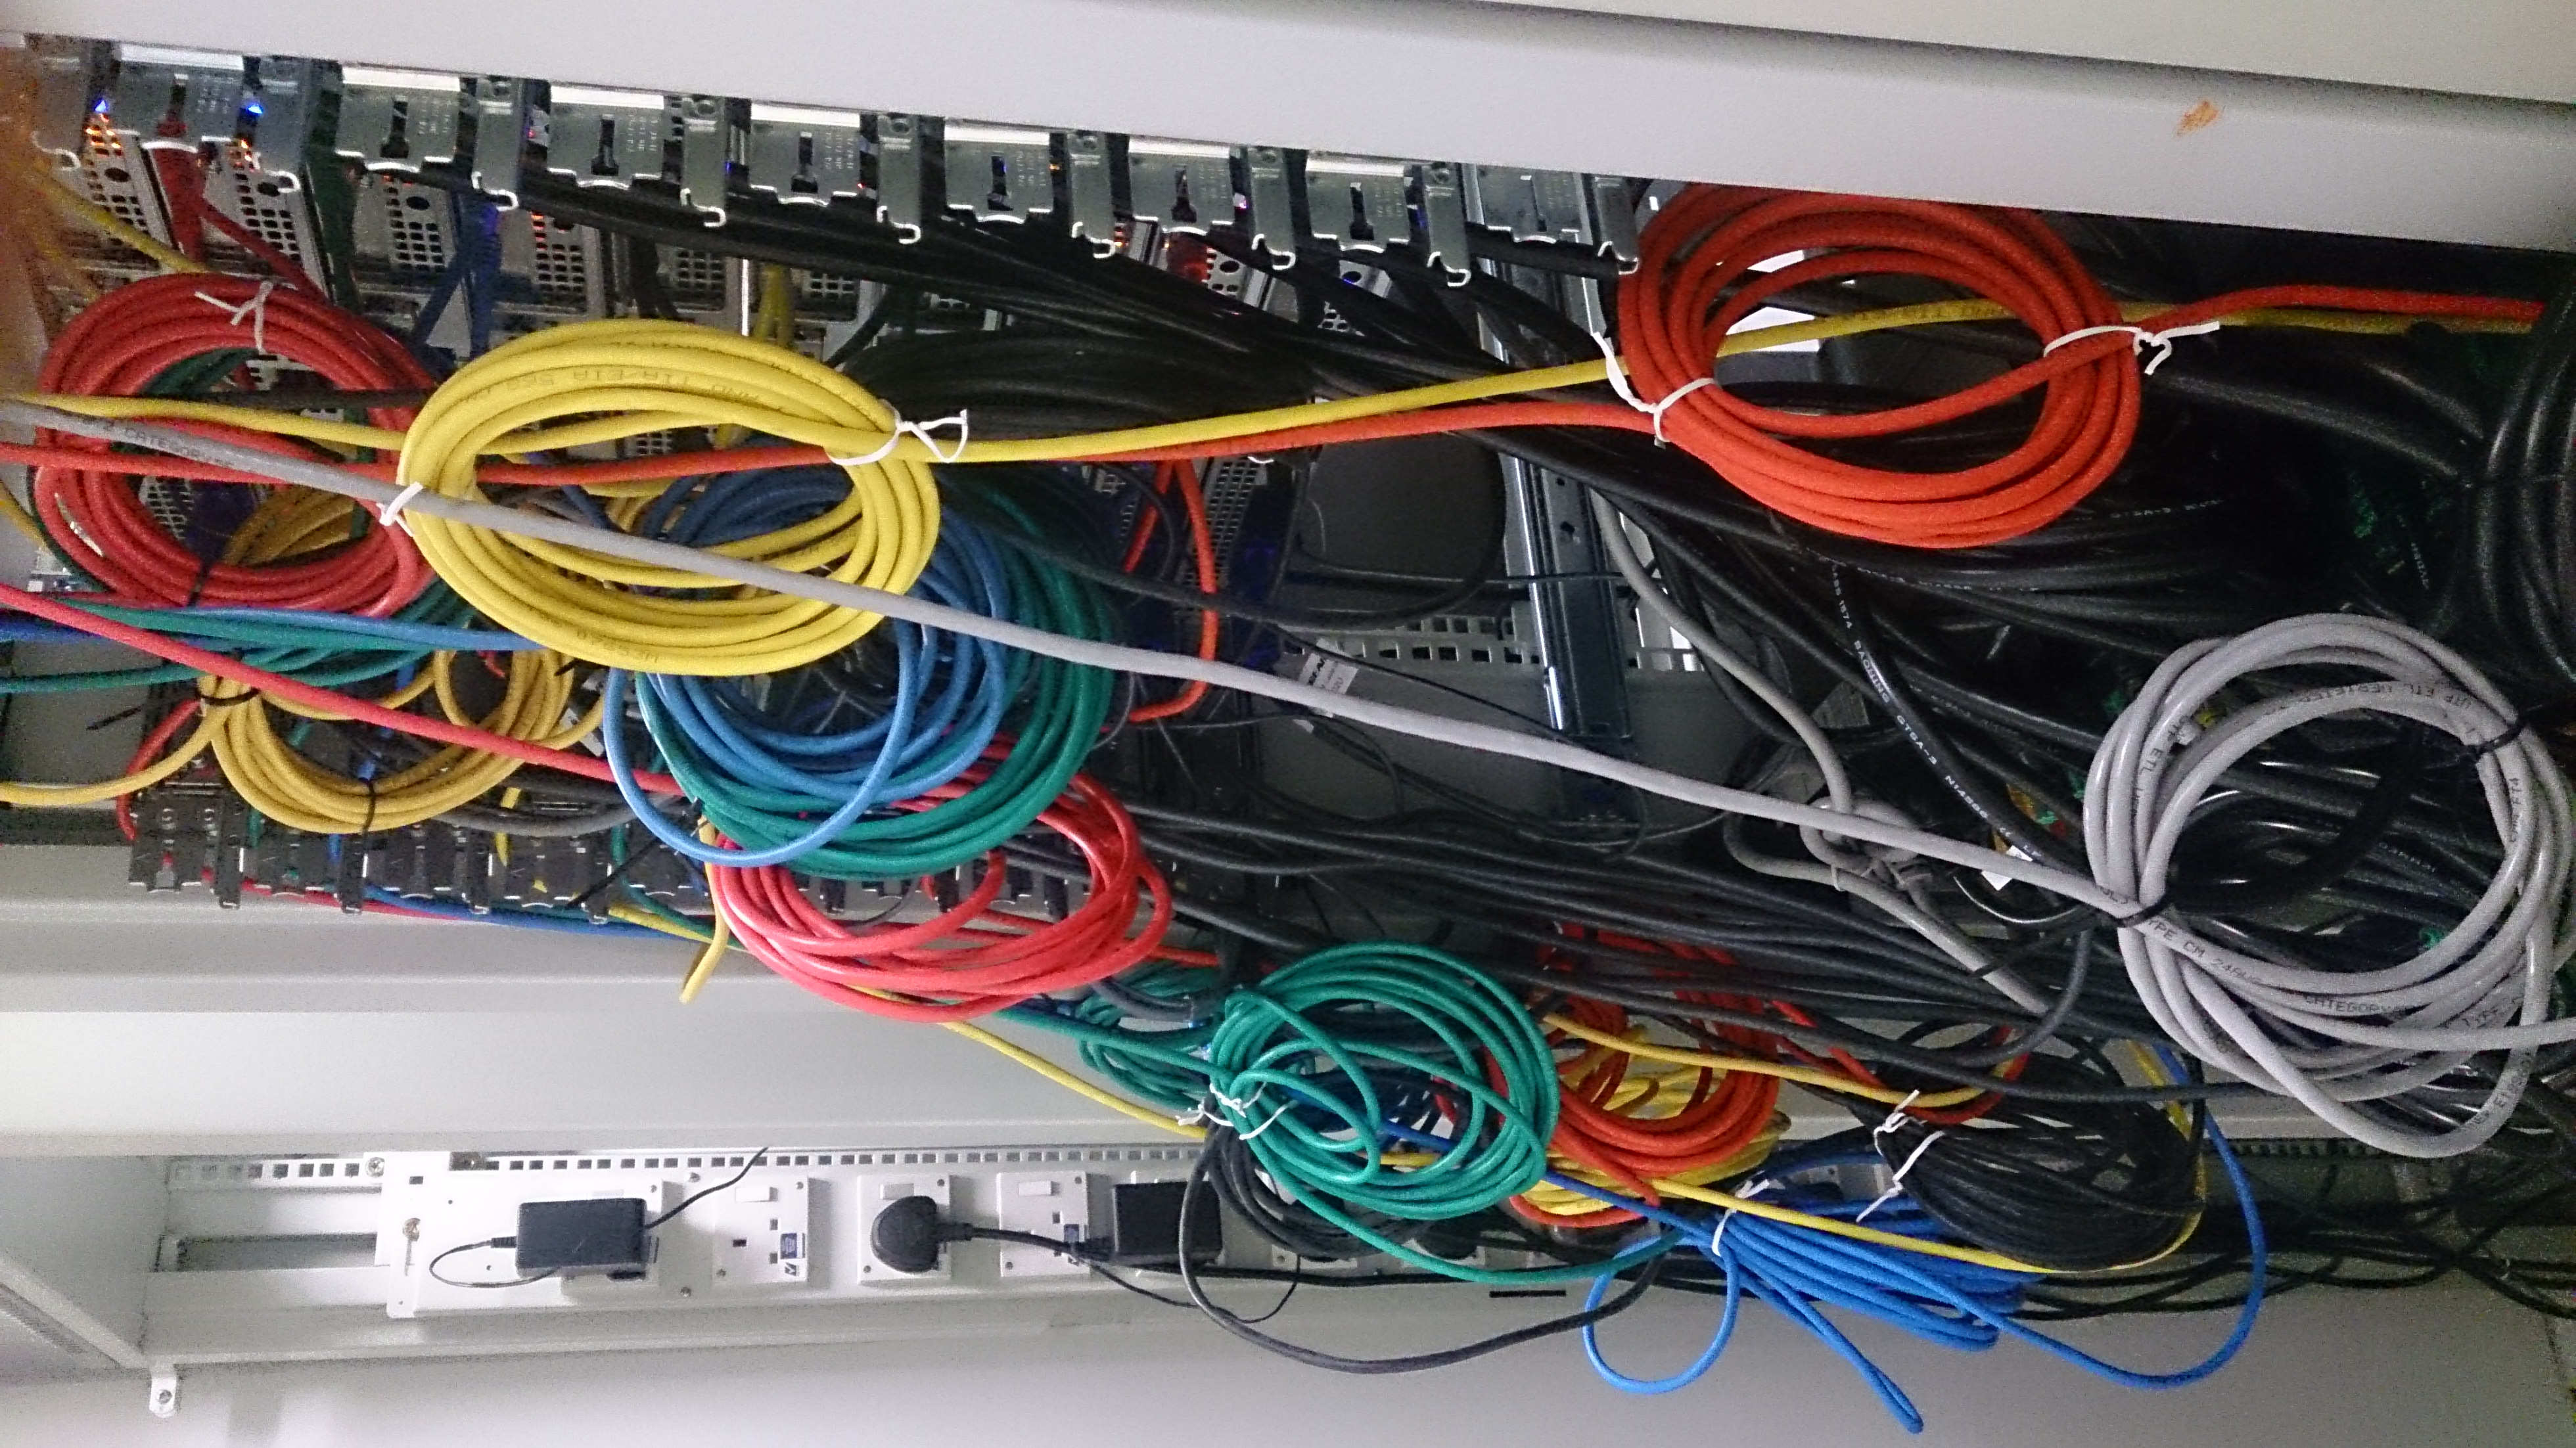 Server room with network cables